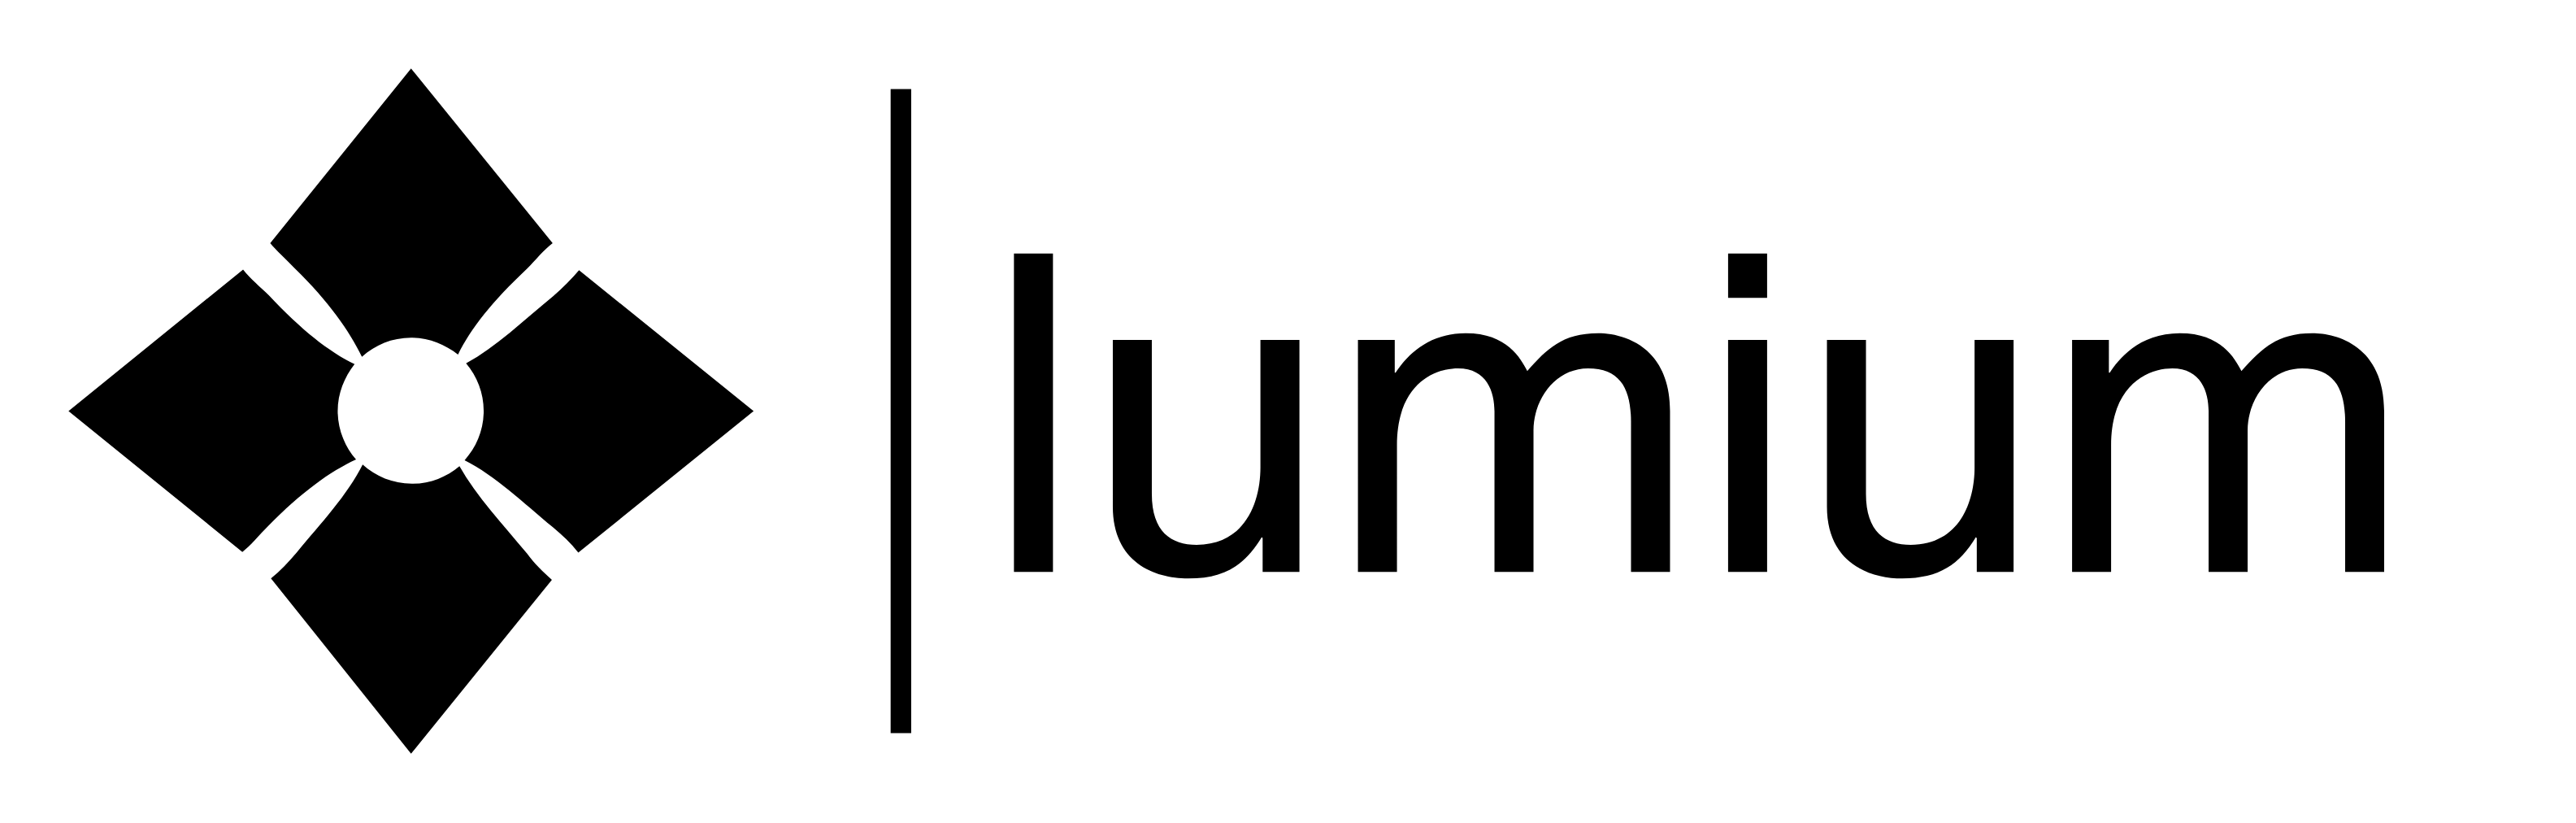 Shows a black logo in light color mode and a white one in dark color mode.